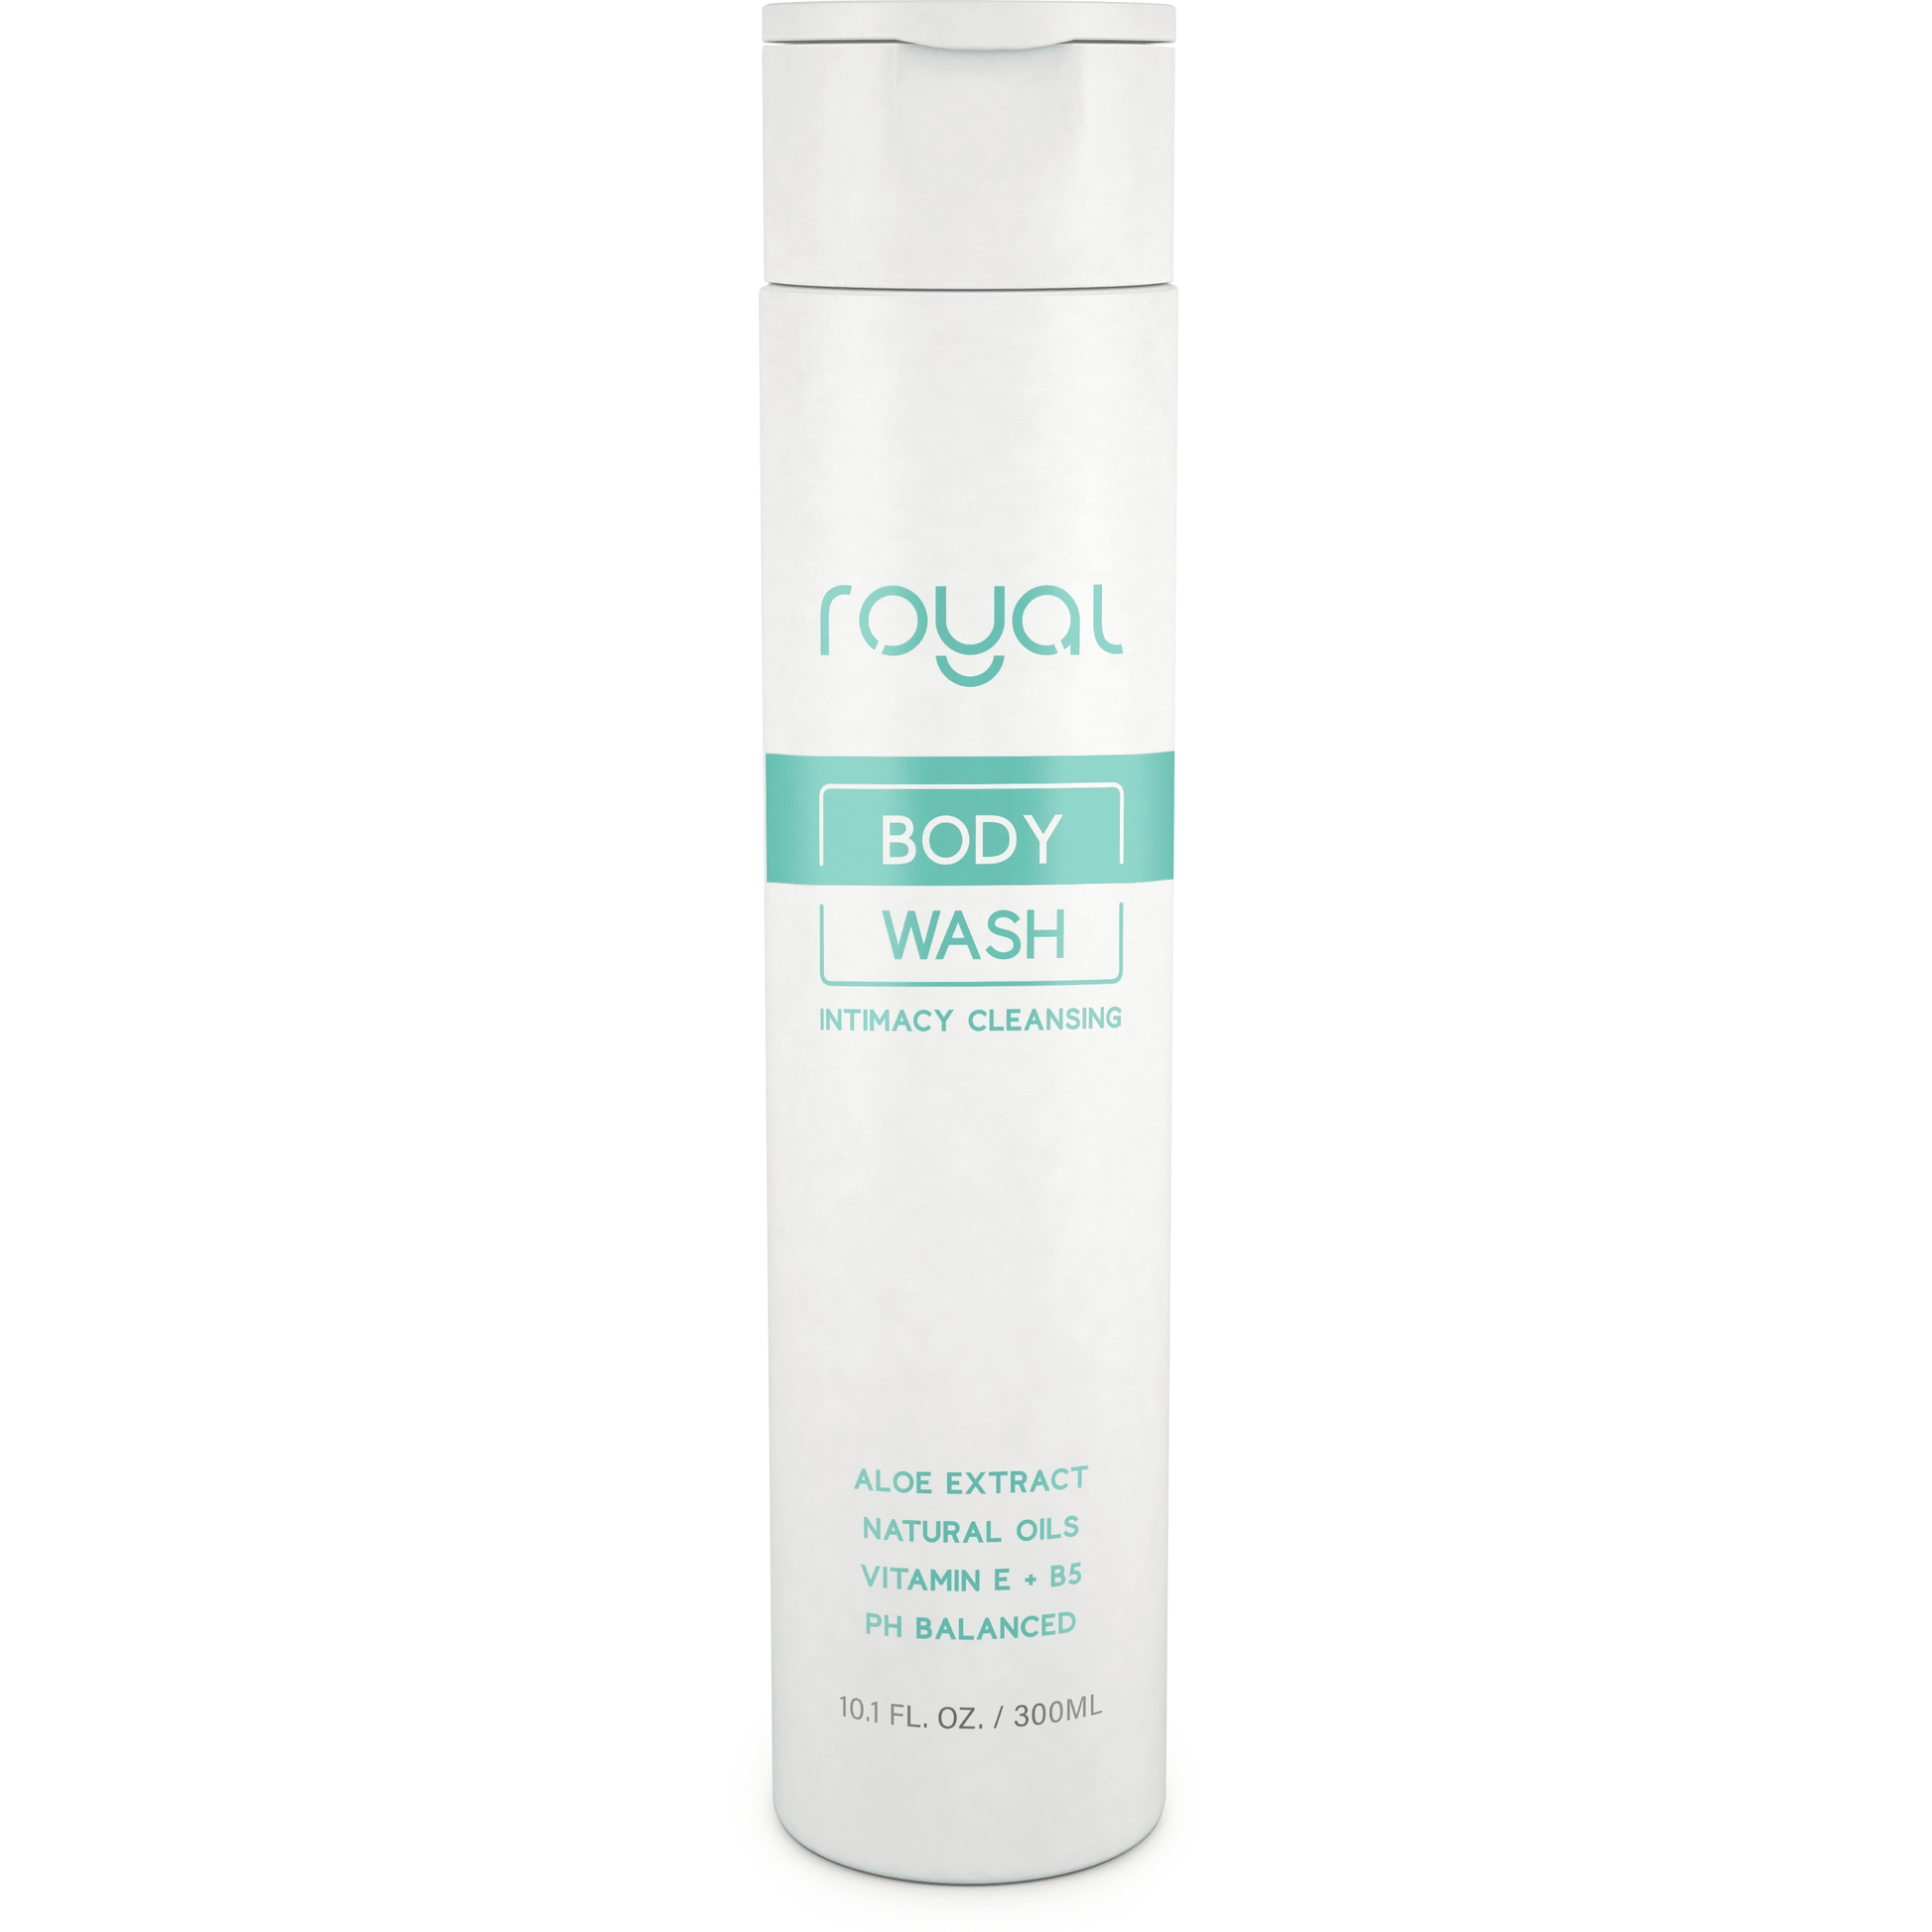 Intimacy Cleansing Daily Body Wash - Royal Intimacy